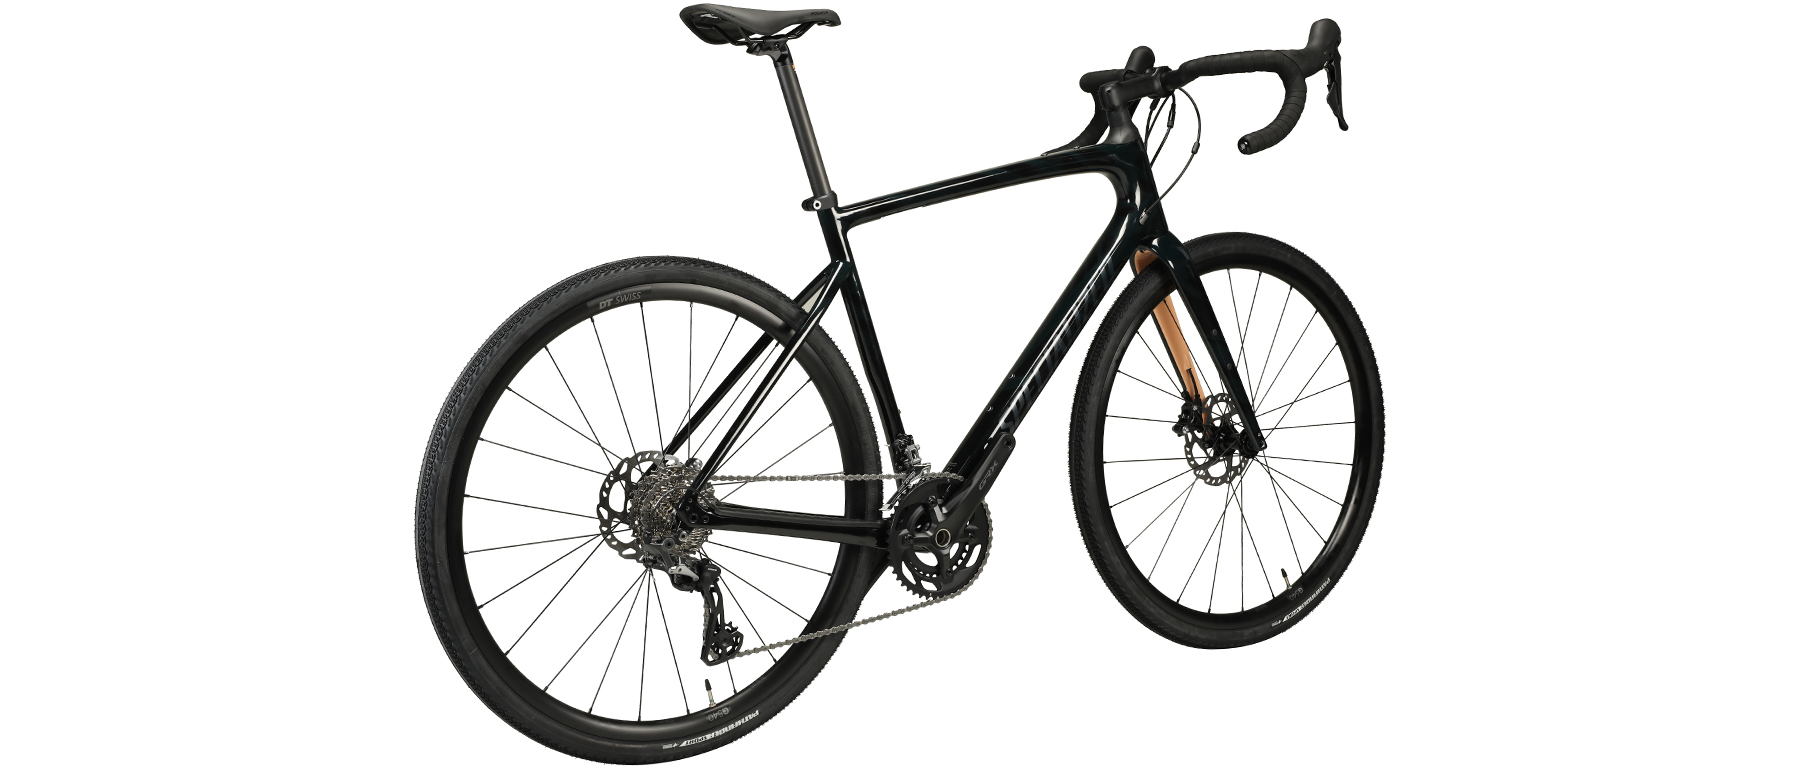 Specialized Diverge Sport Carbon Bicycle